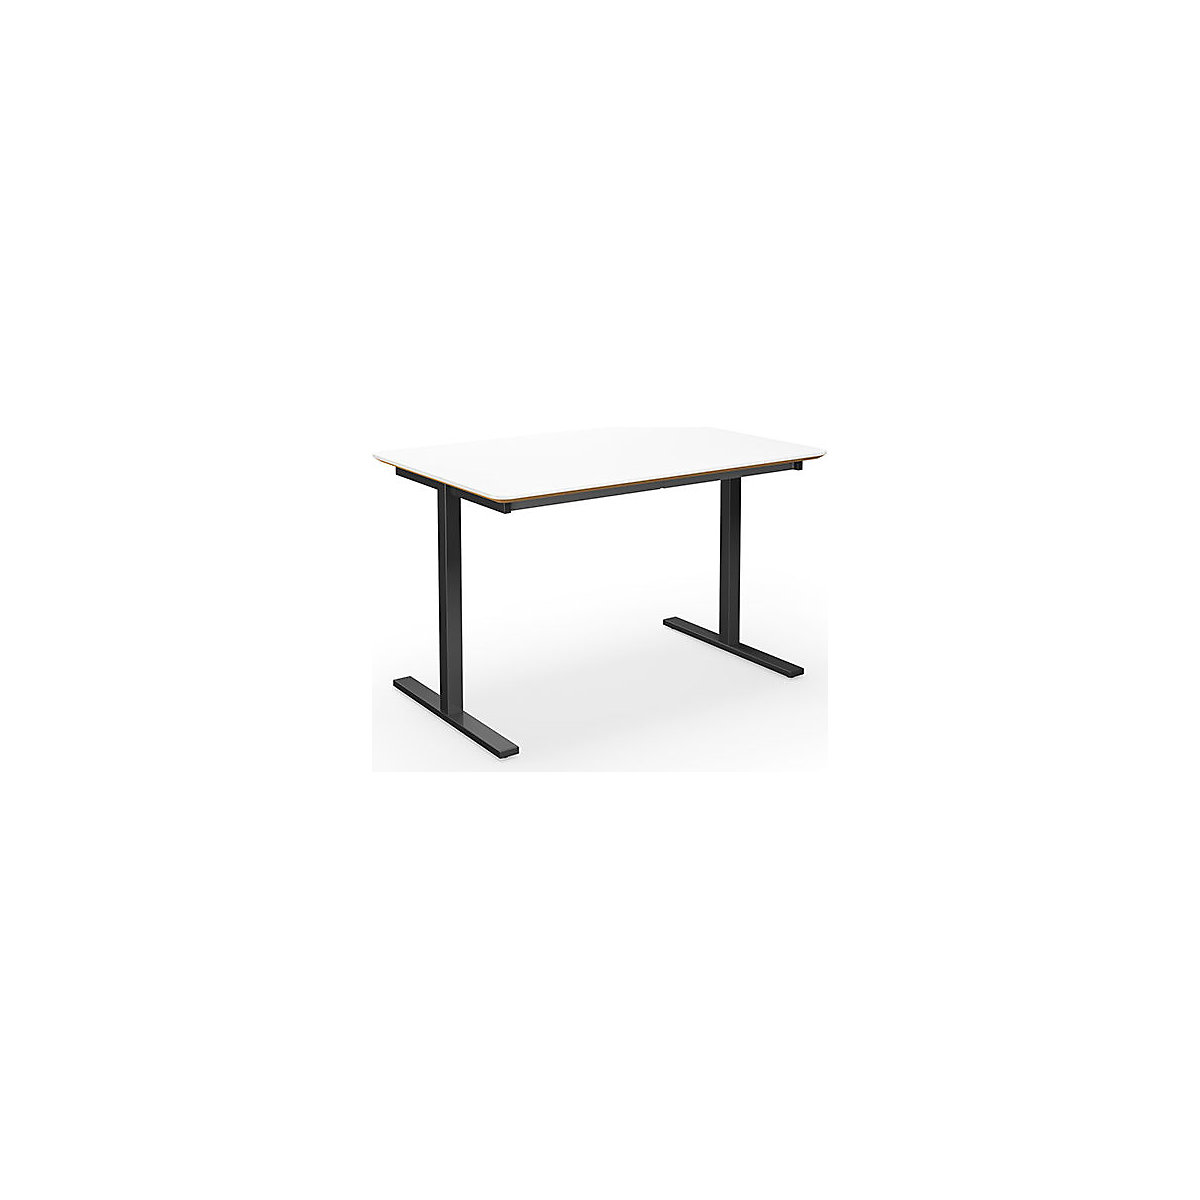 DUO-T Trend multi-purpose desk, straight tabletop, rounded corners, WxD 1200 x 800 mm, white, black-2